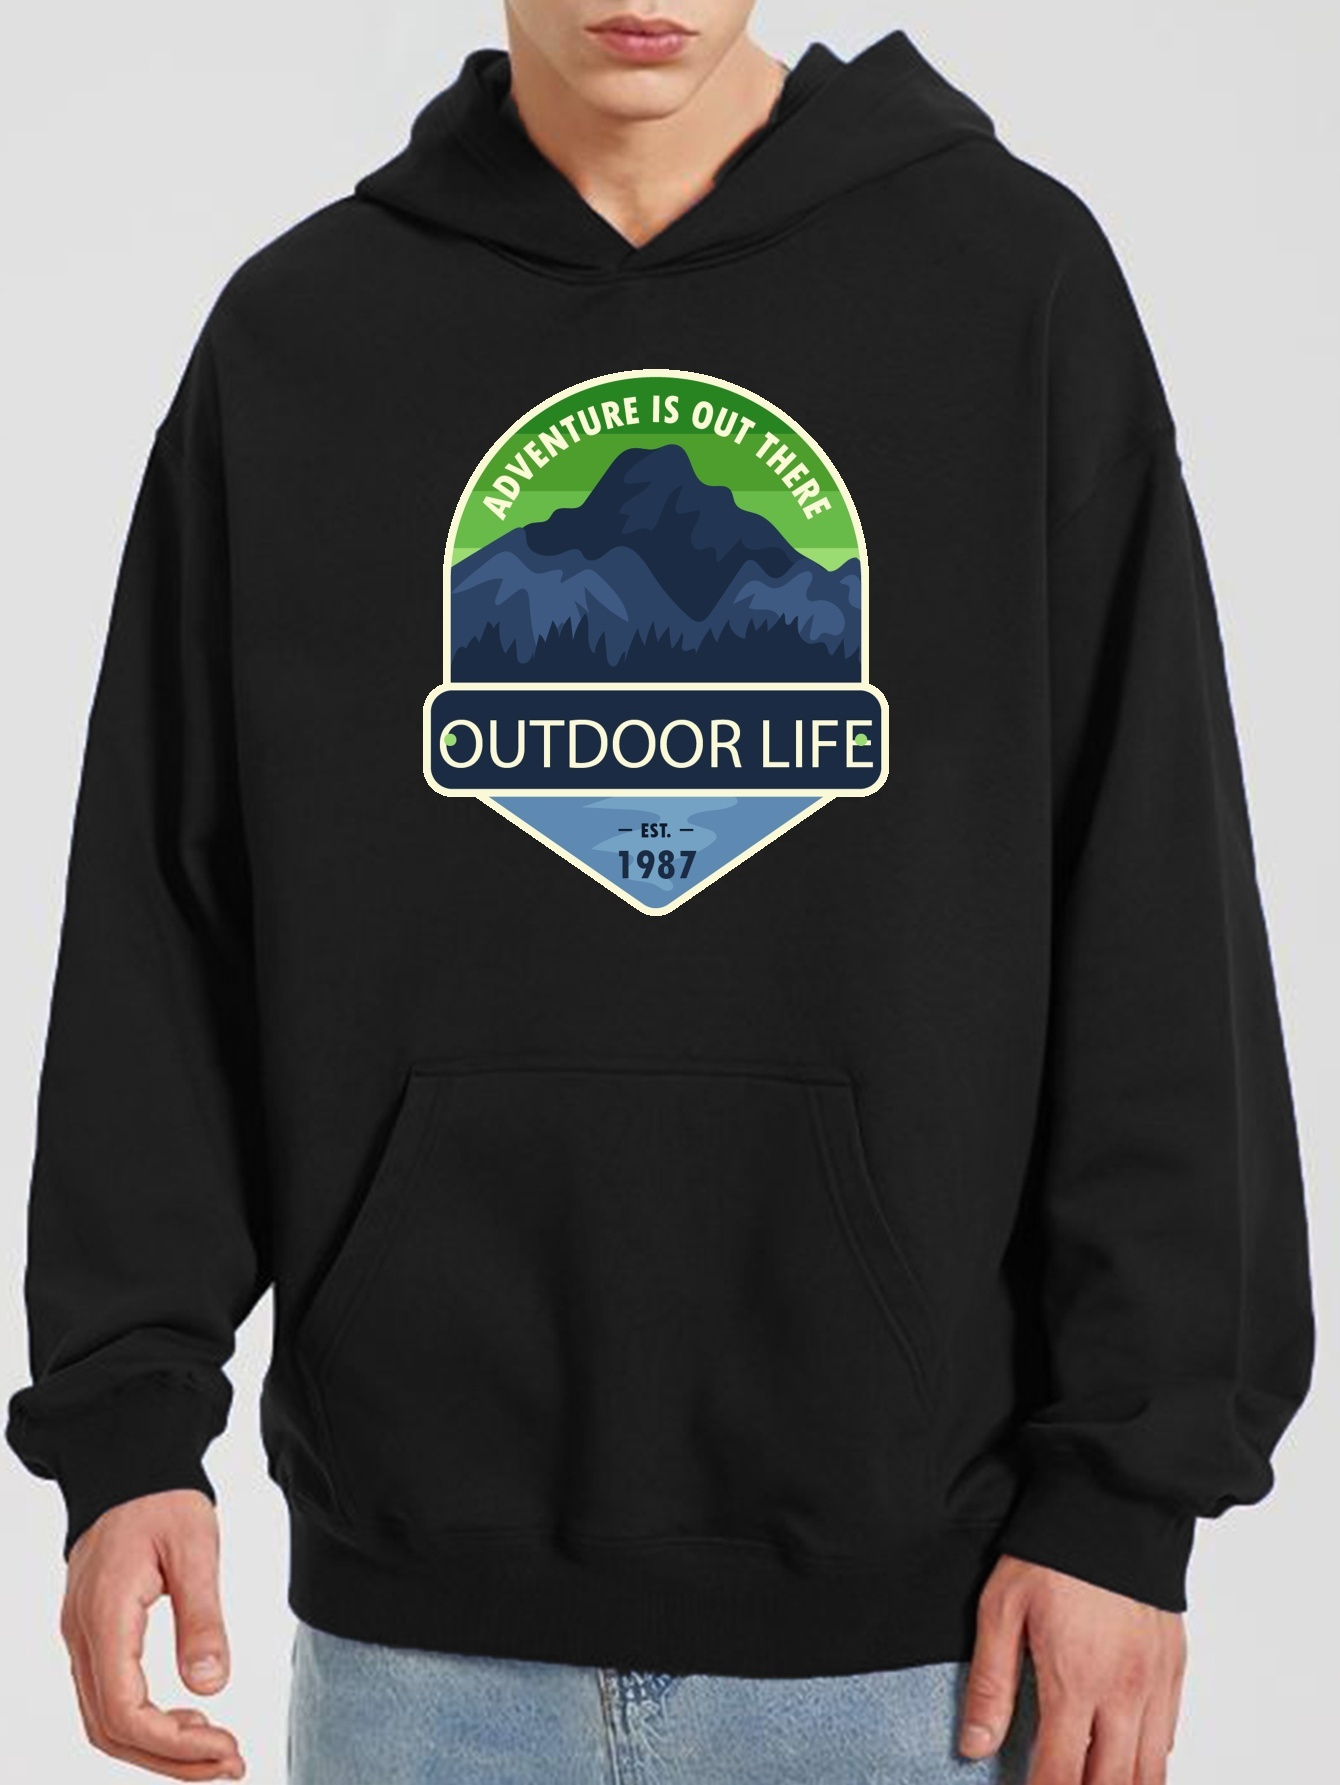 Outdoor Life Clothing for Men